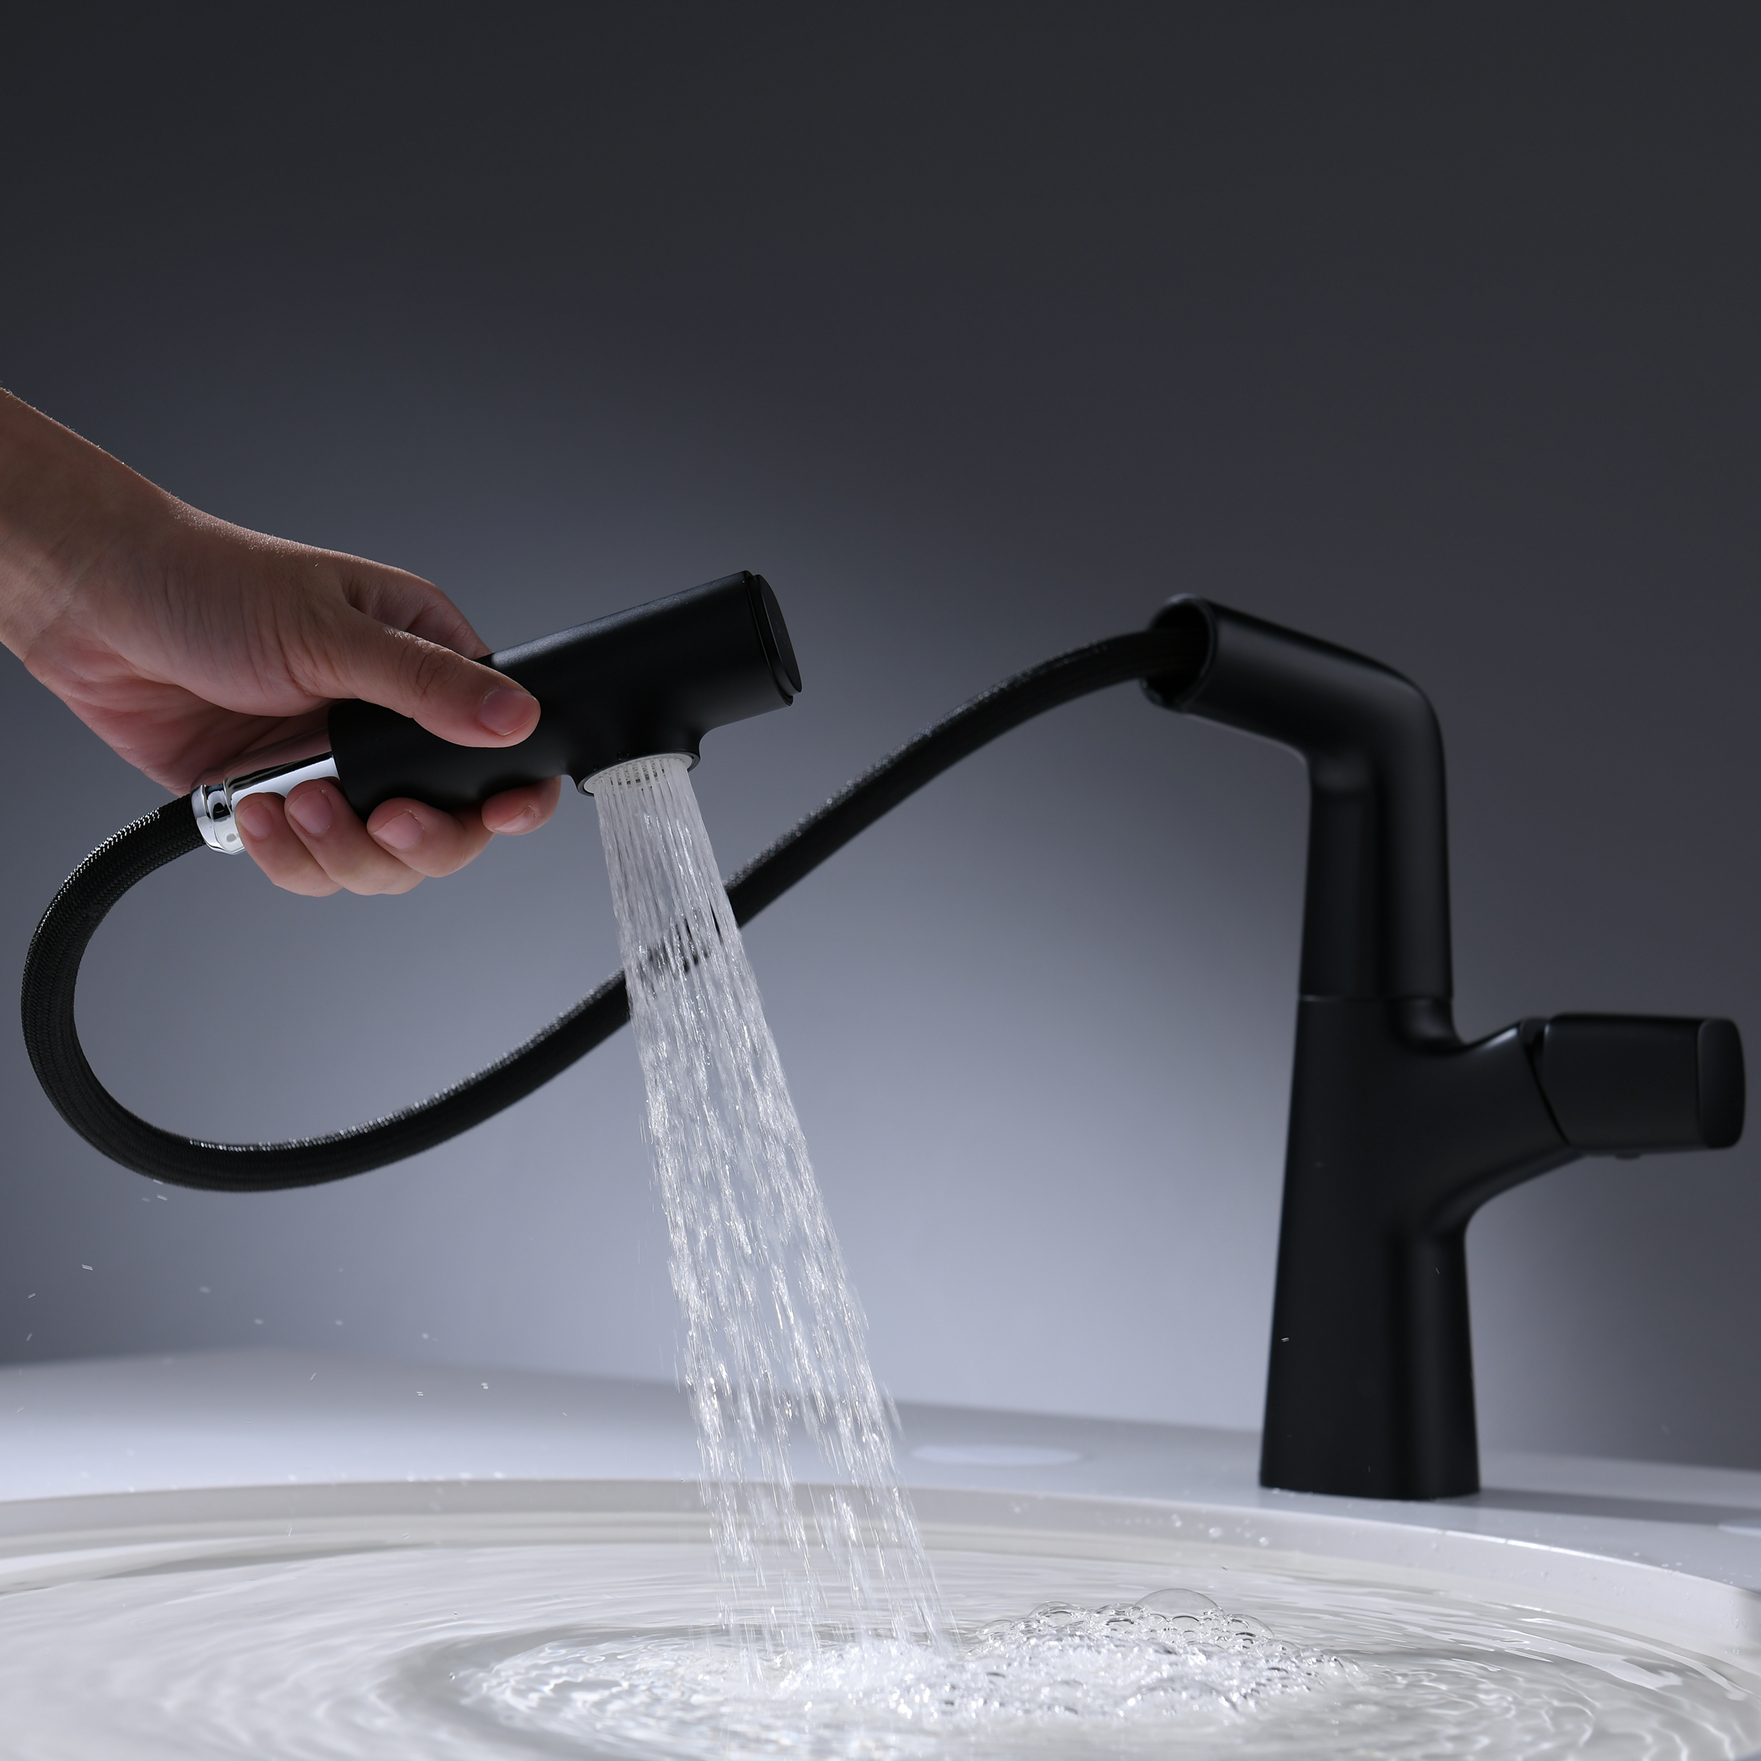 Black Long Body Pull-out Spray Lavatory Luxury Basin Water Tap